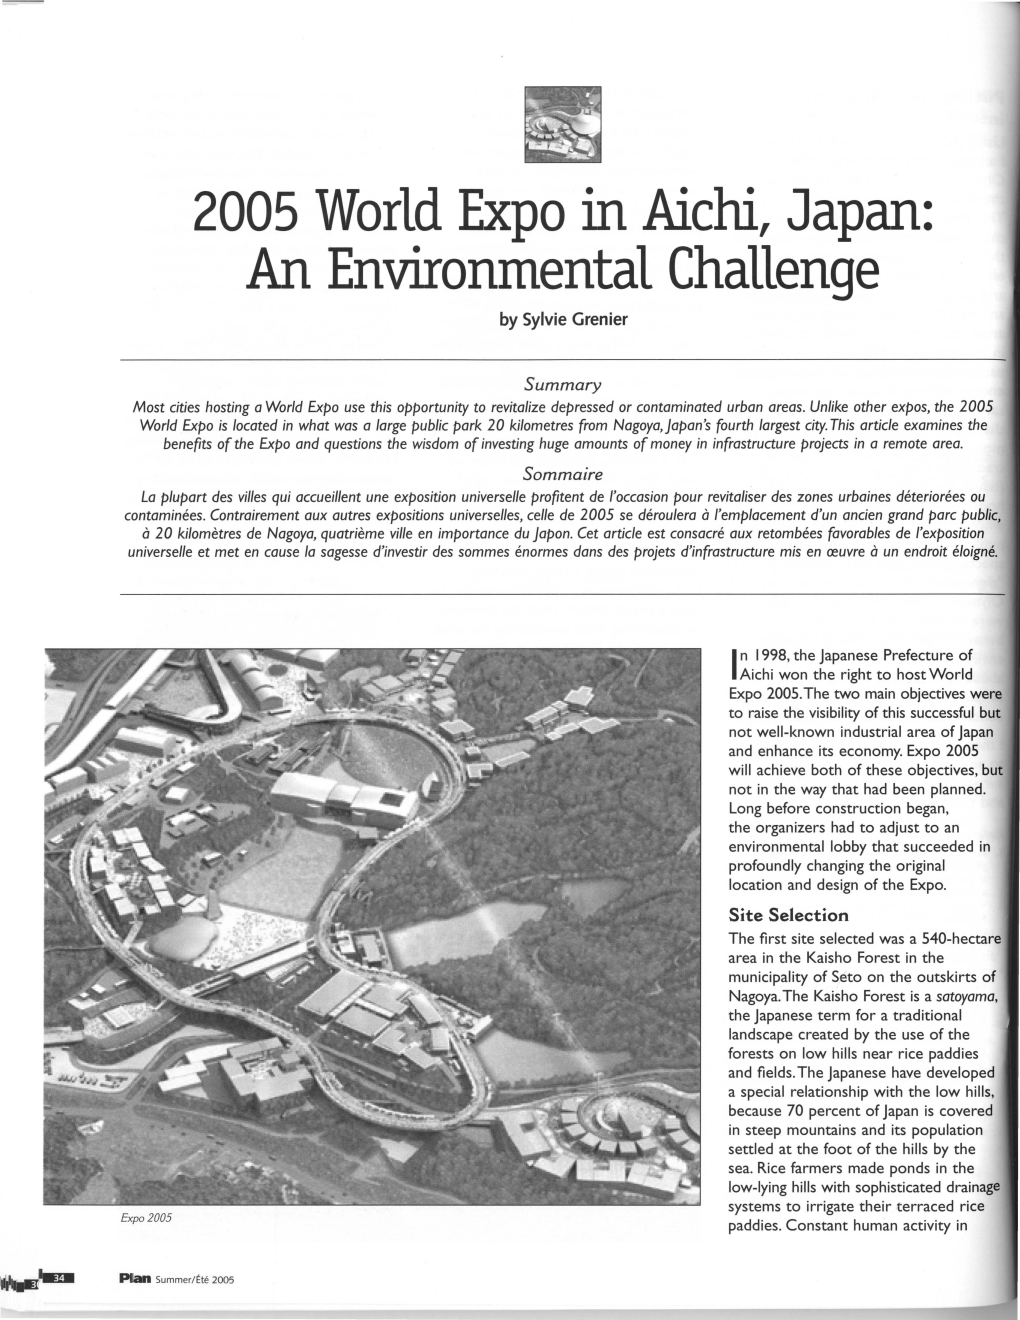 2005 World Expo in Aichi, Japan: an Environmental Challenge by Sylvie Grenier